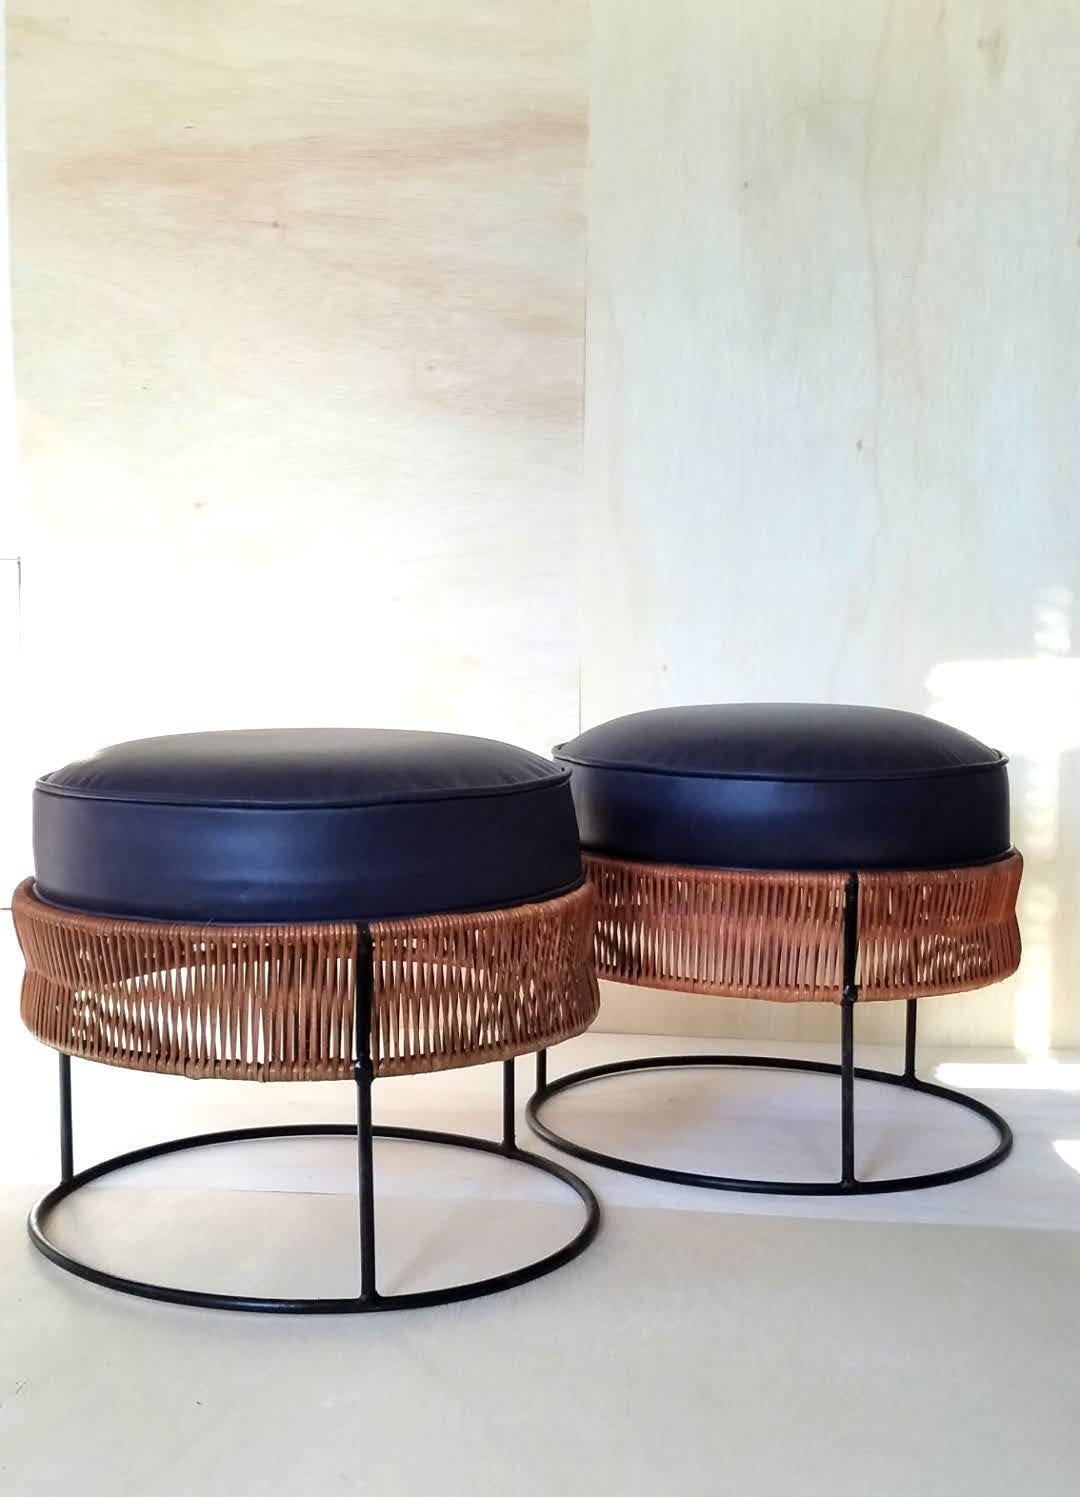 American Pair of Wrought Iron and Bamboo End Tables / Stools Arthur Umanoff 1960